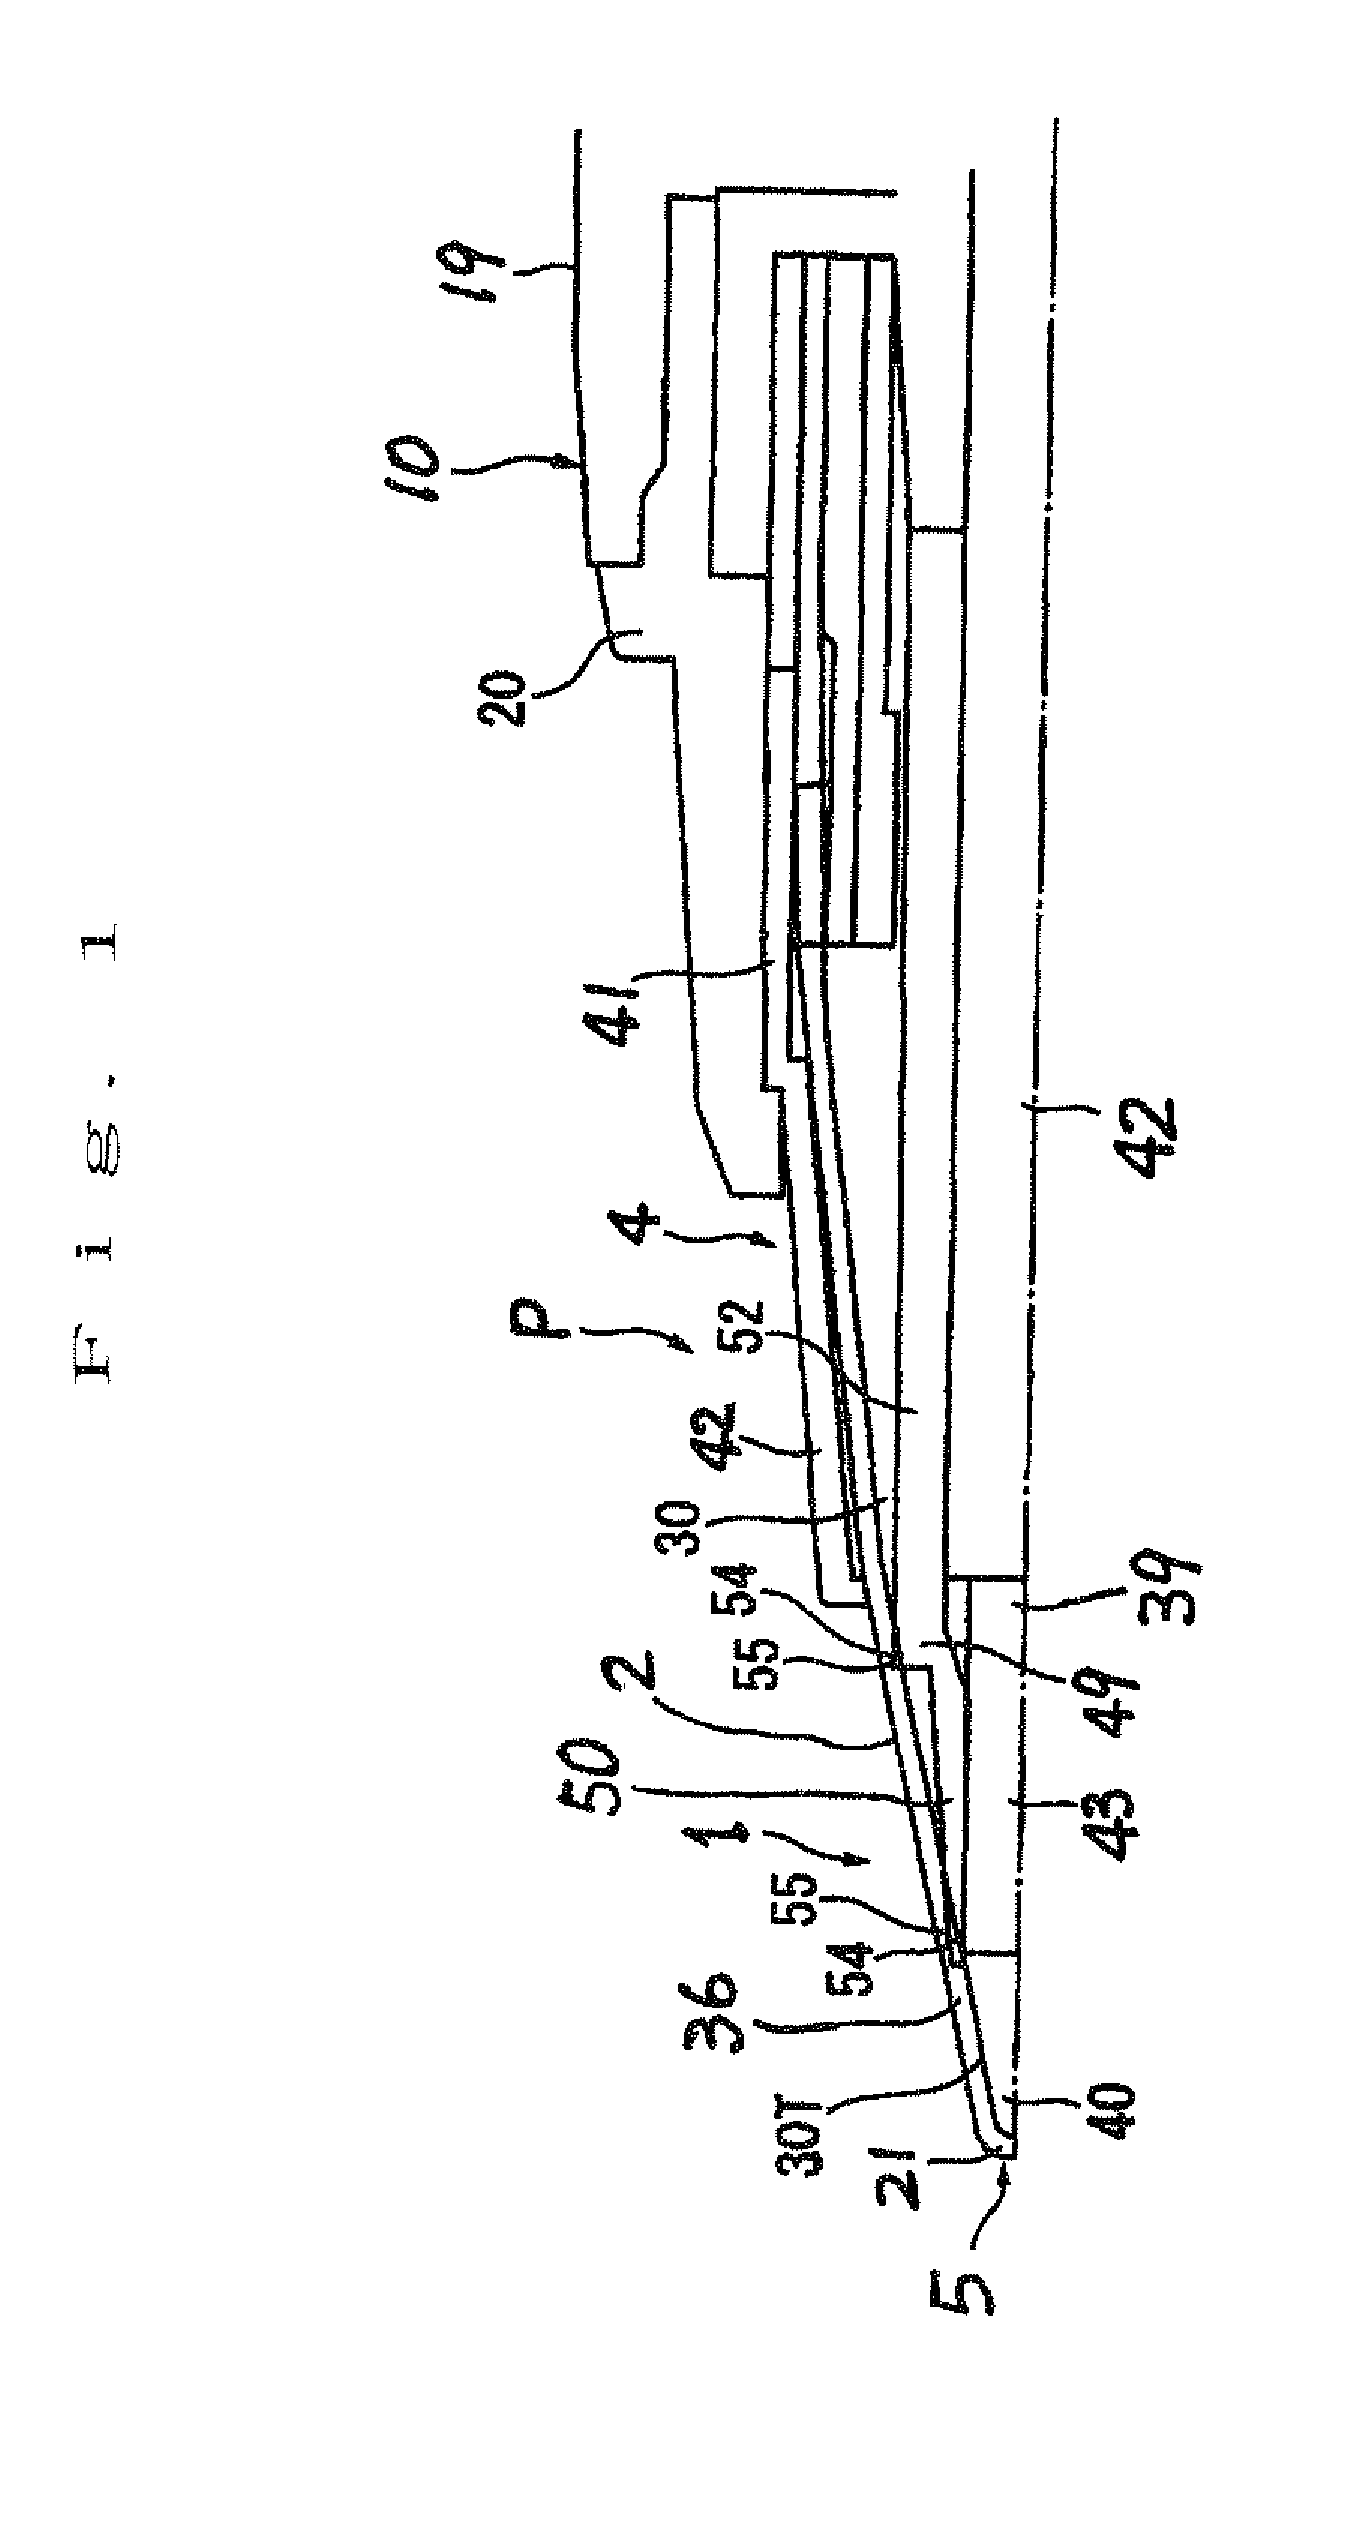 Conical nib and writing instrument incorporating the same